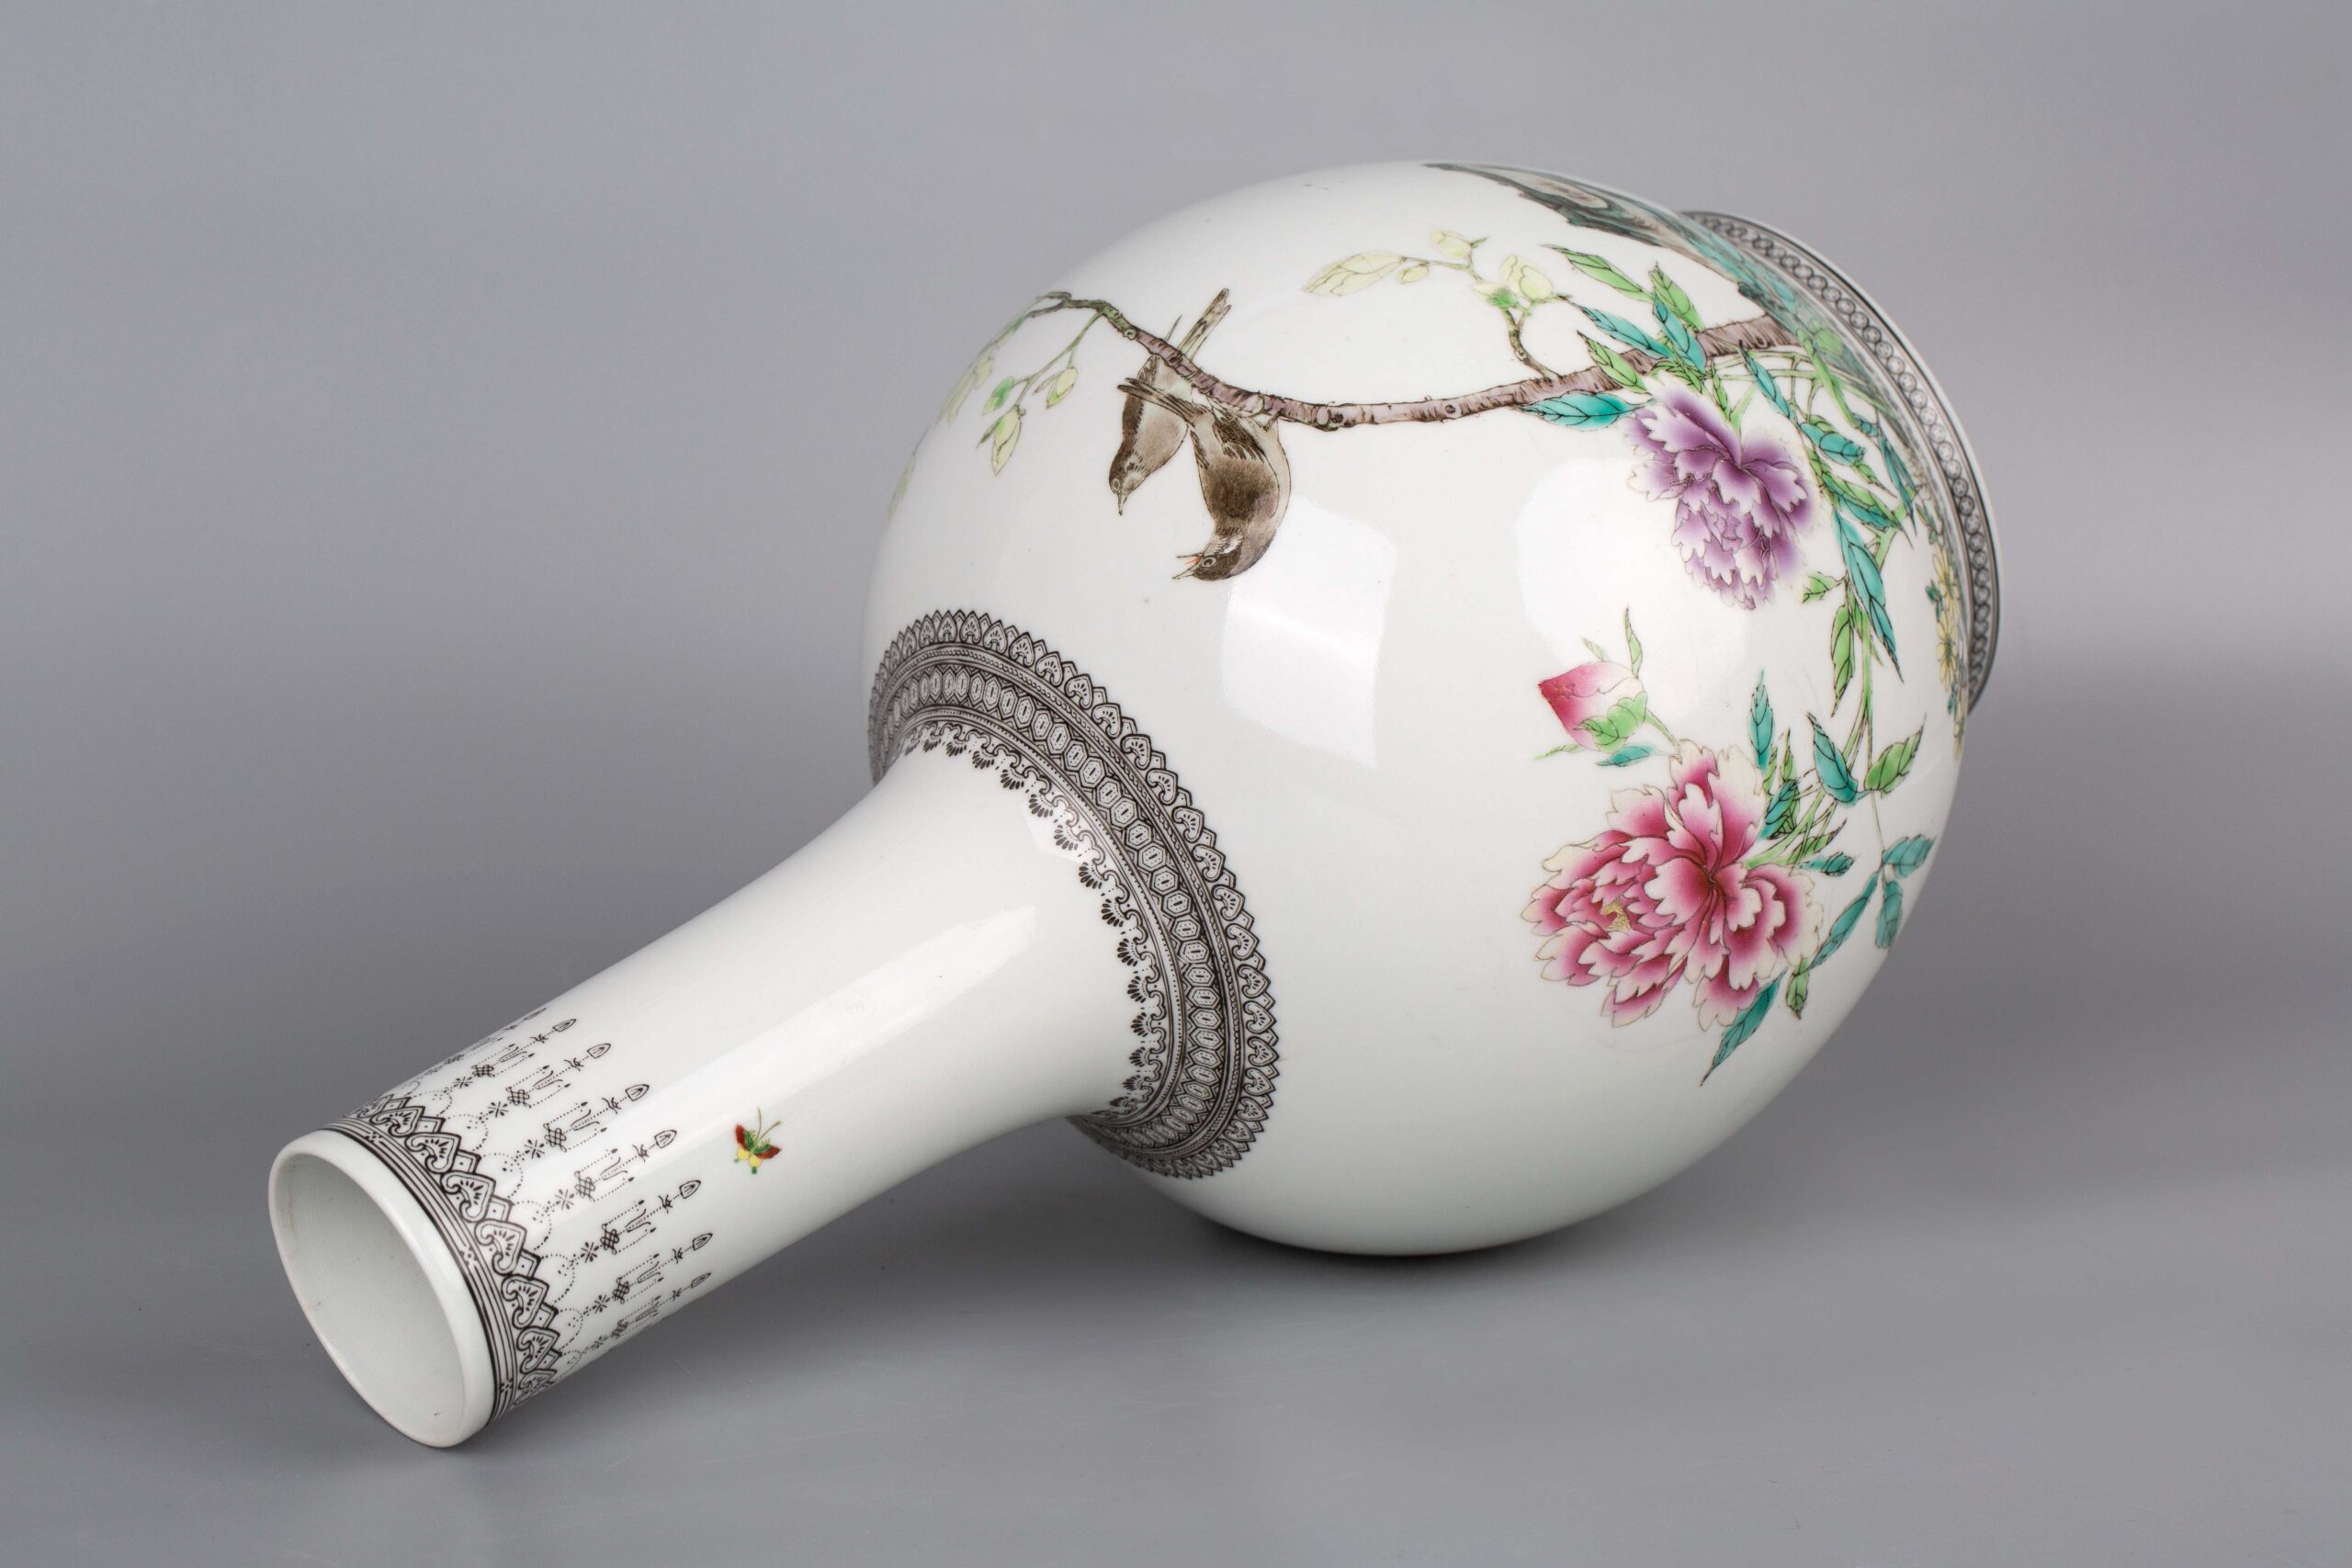 Famille rose flower and bird vase, tianqiuping, 1950s-1970s, made 